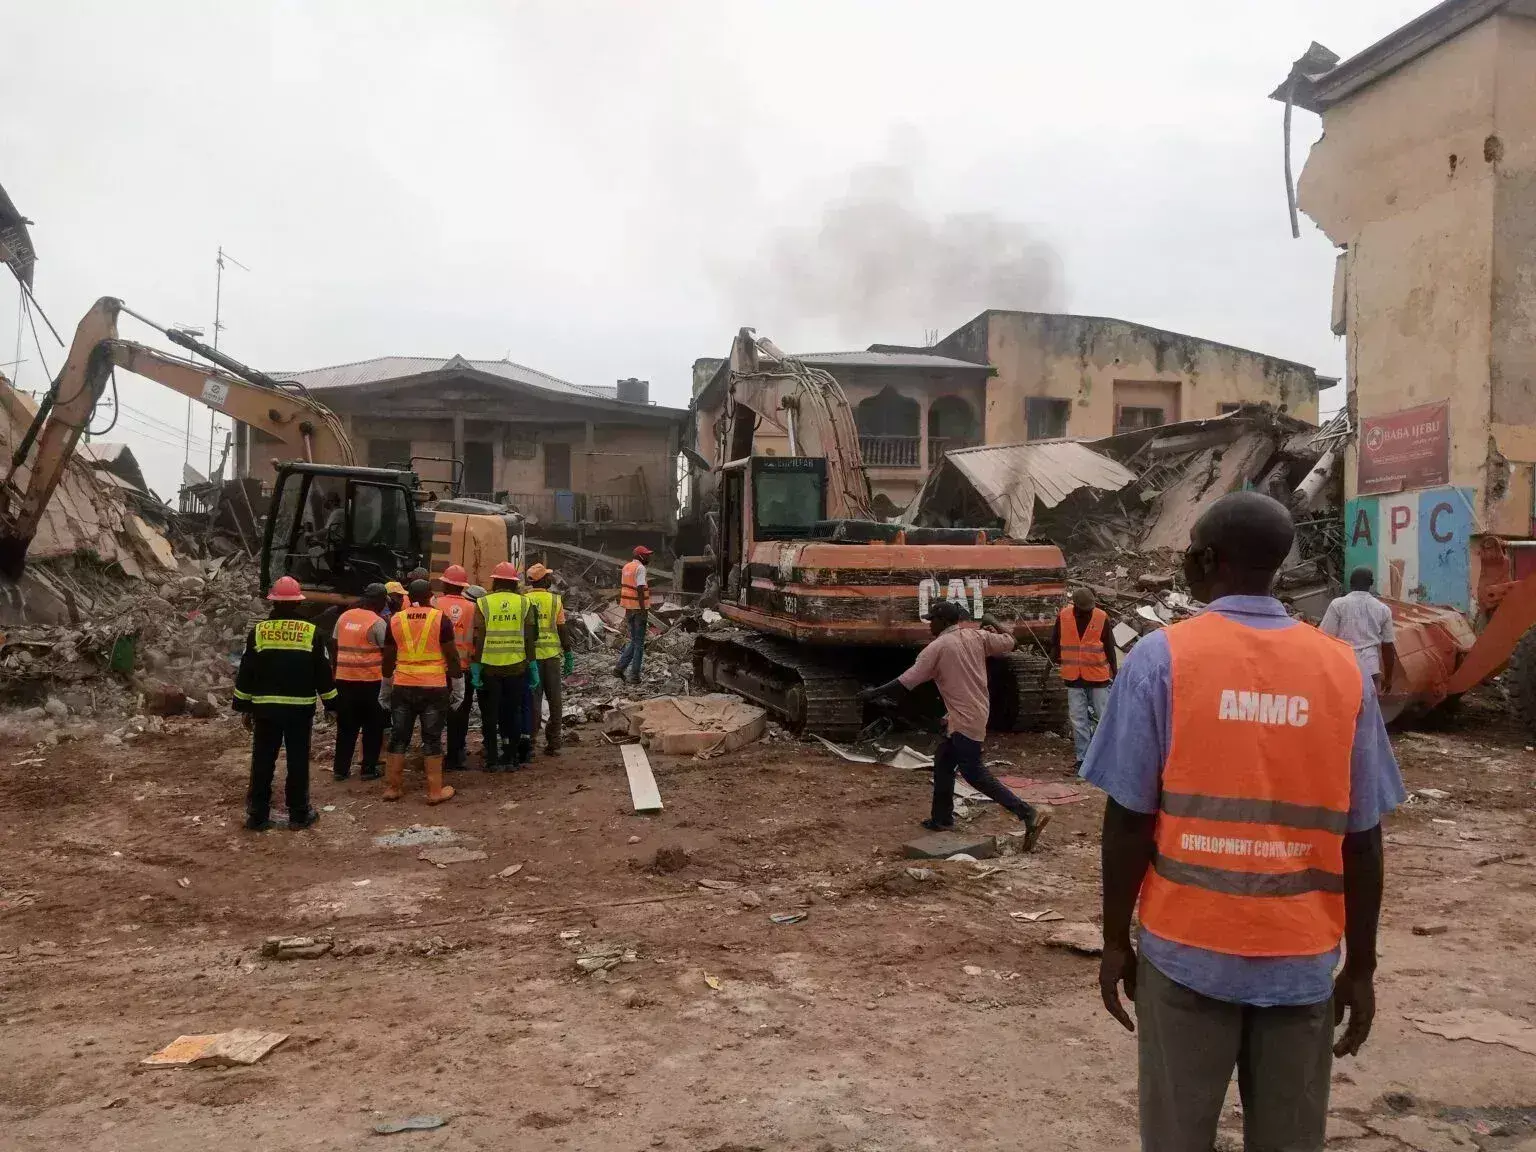 Building collapse: Wike orders arrest of landlord, as victims count their losses